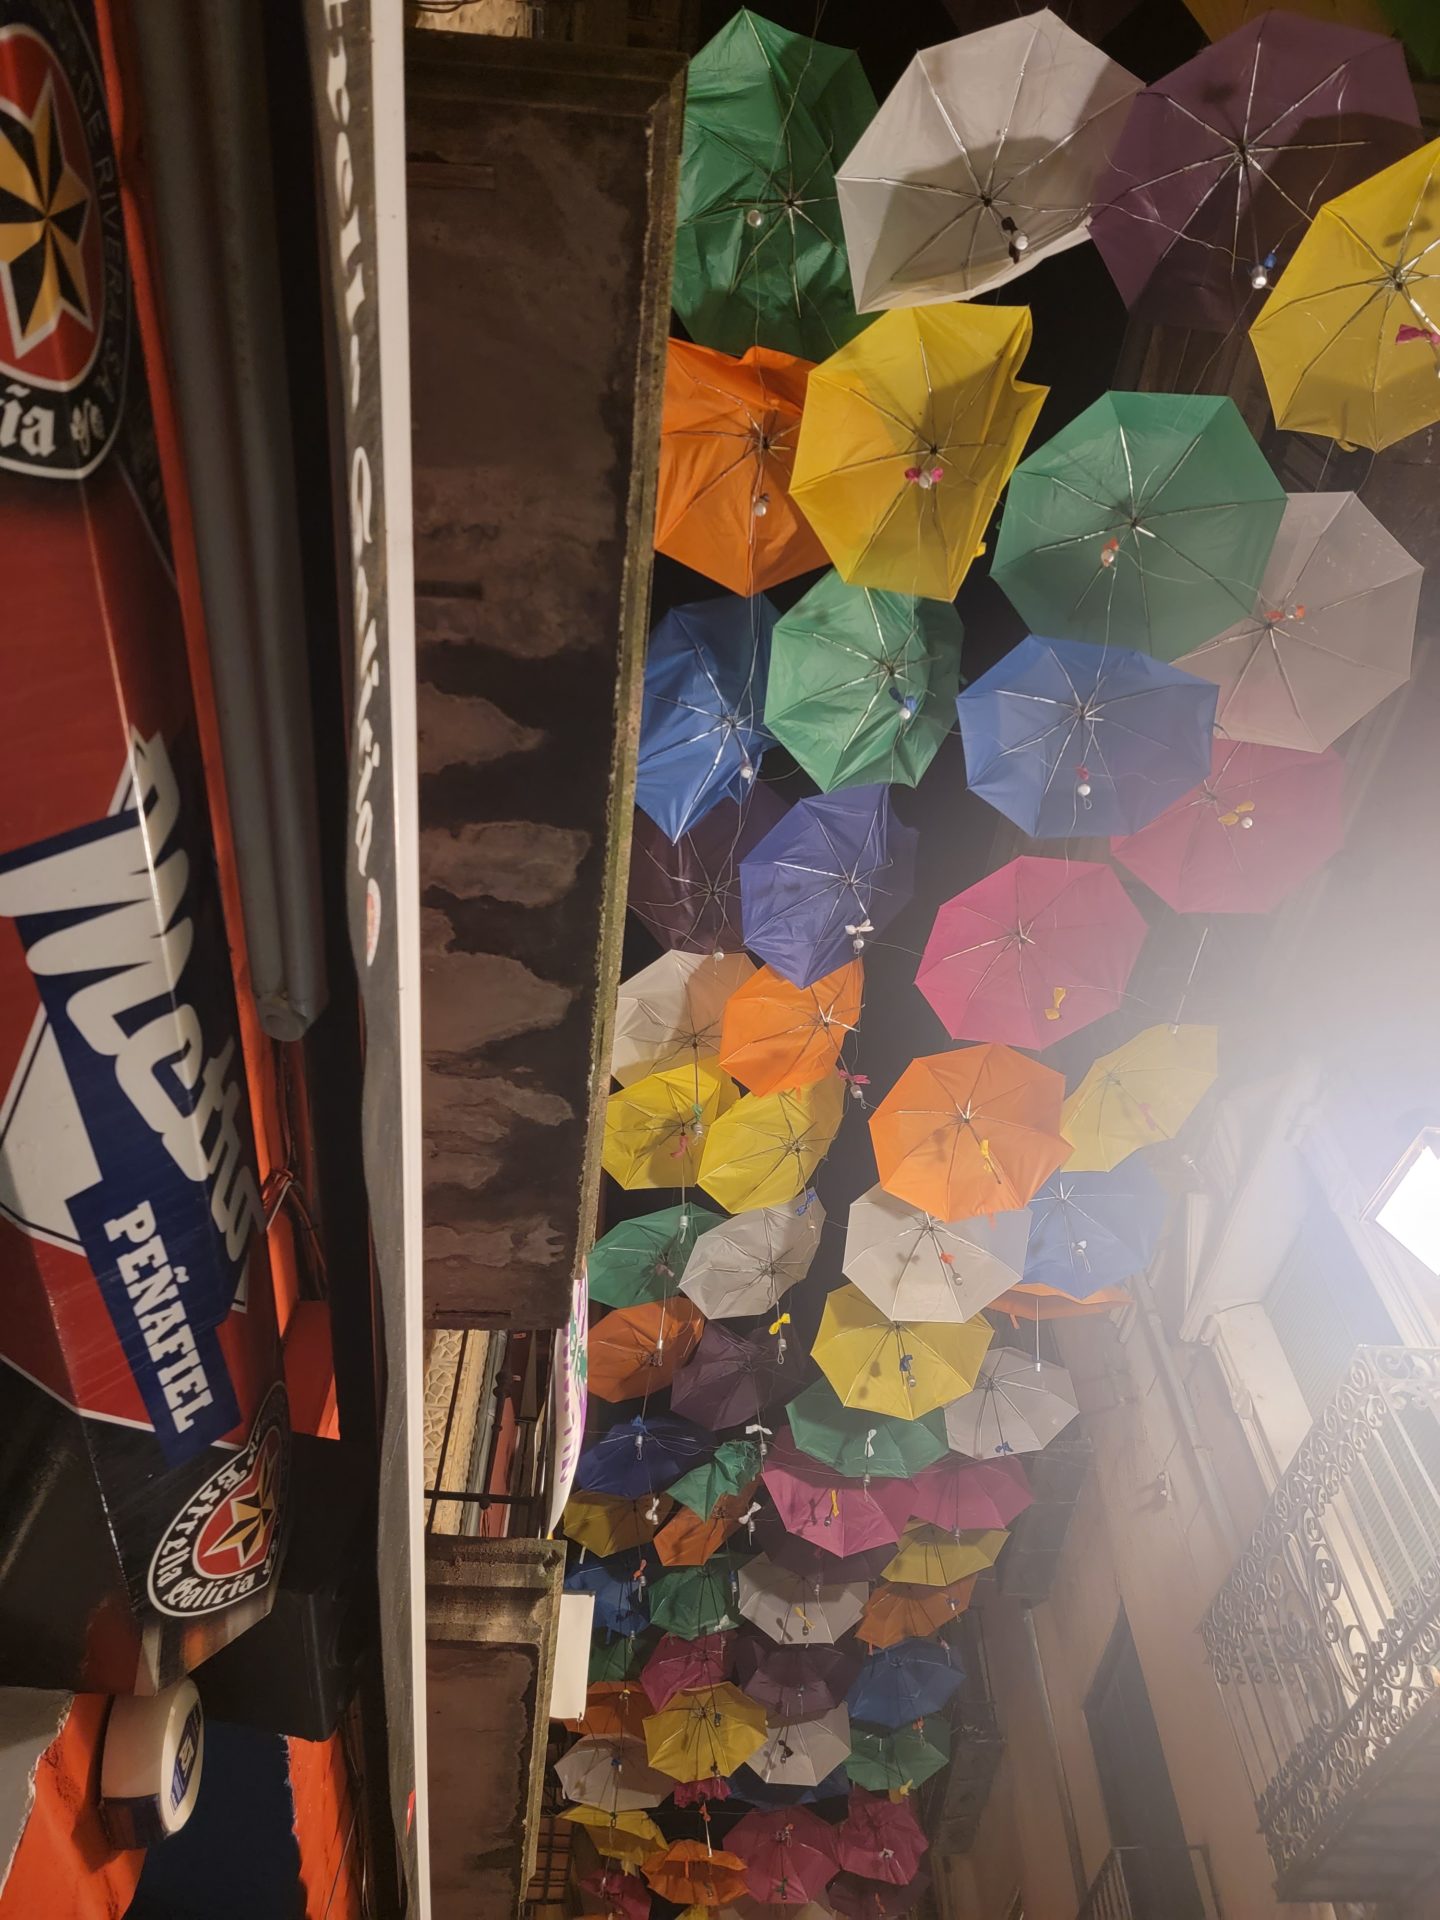 a group of umbrellas from a wall